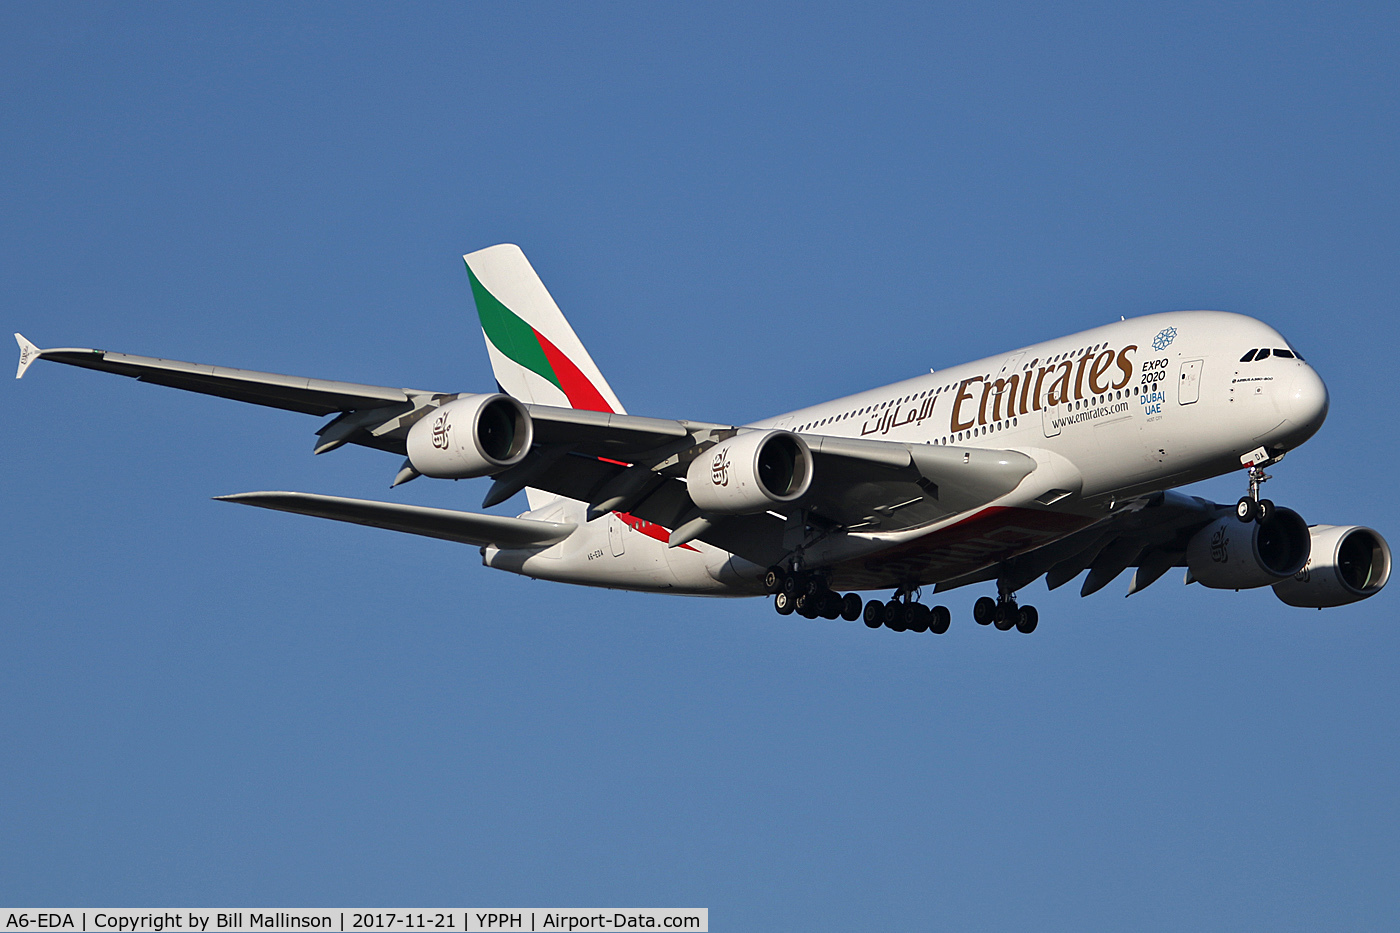 A6-EDA, 2007 Airbus A380-861 C/N 011, TO 21